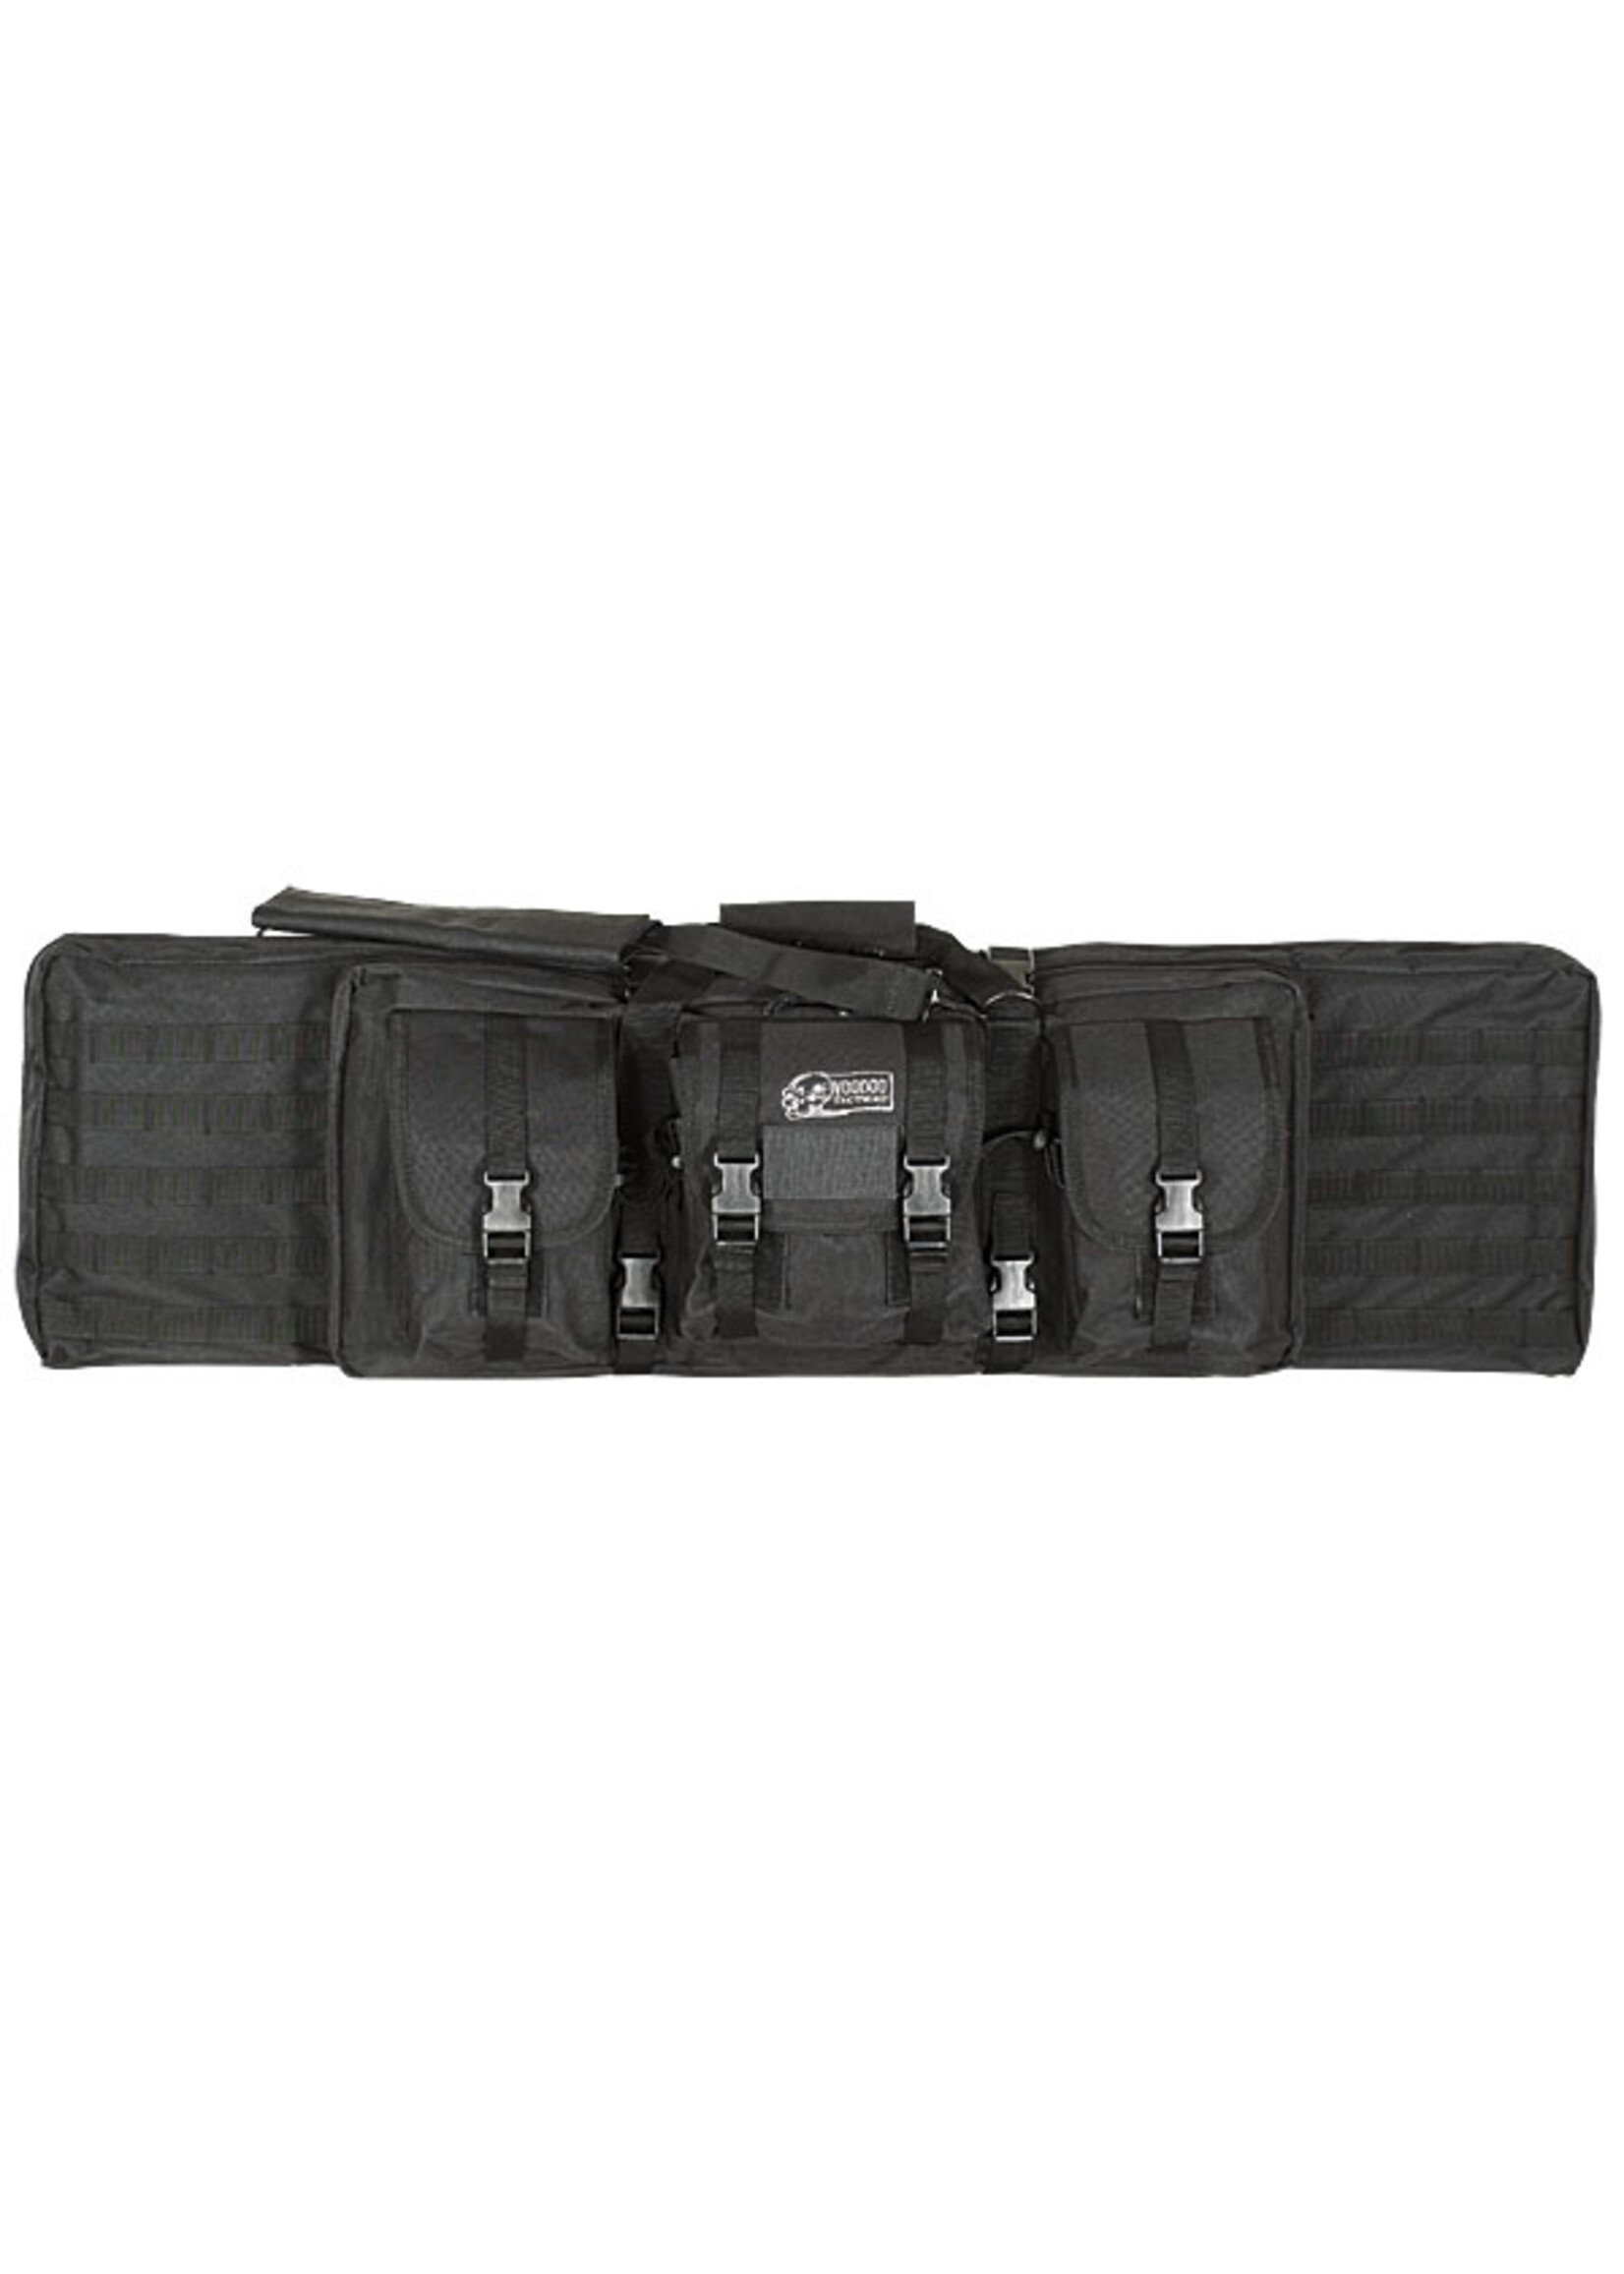 VOODOO TACTICAL 42"  PADDED WEAPONS CASE BLACK